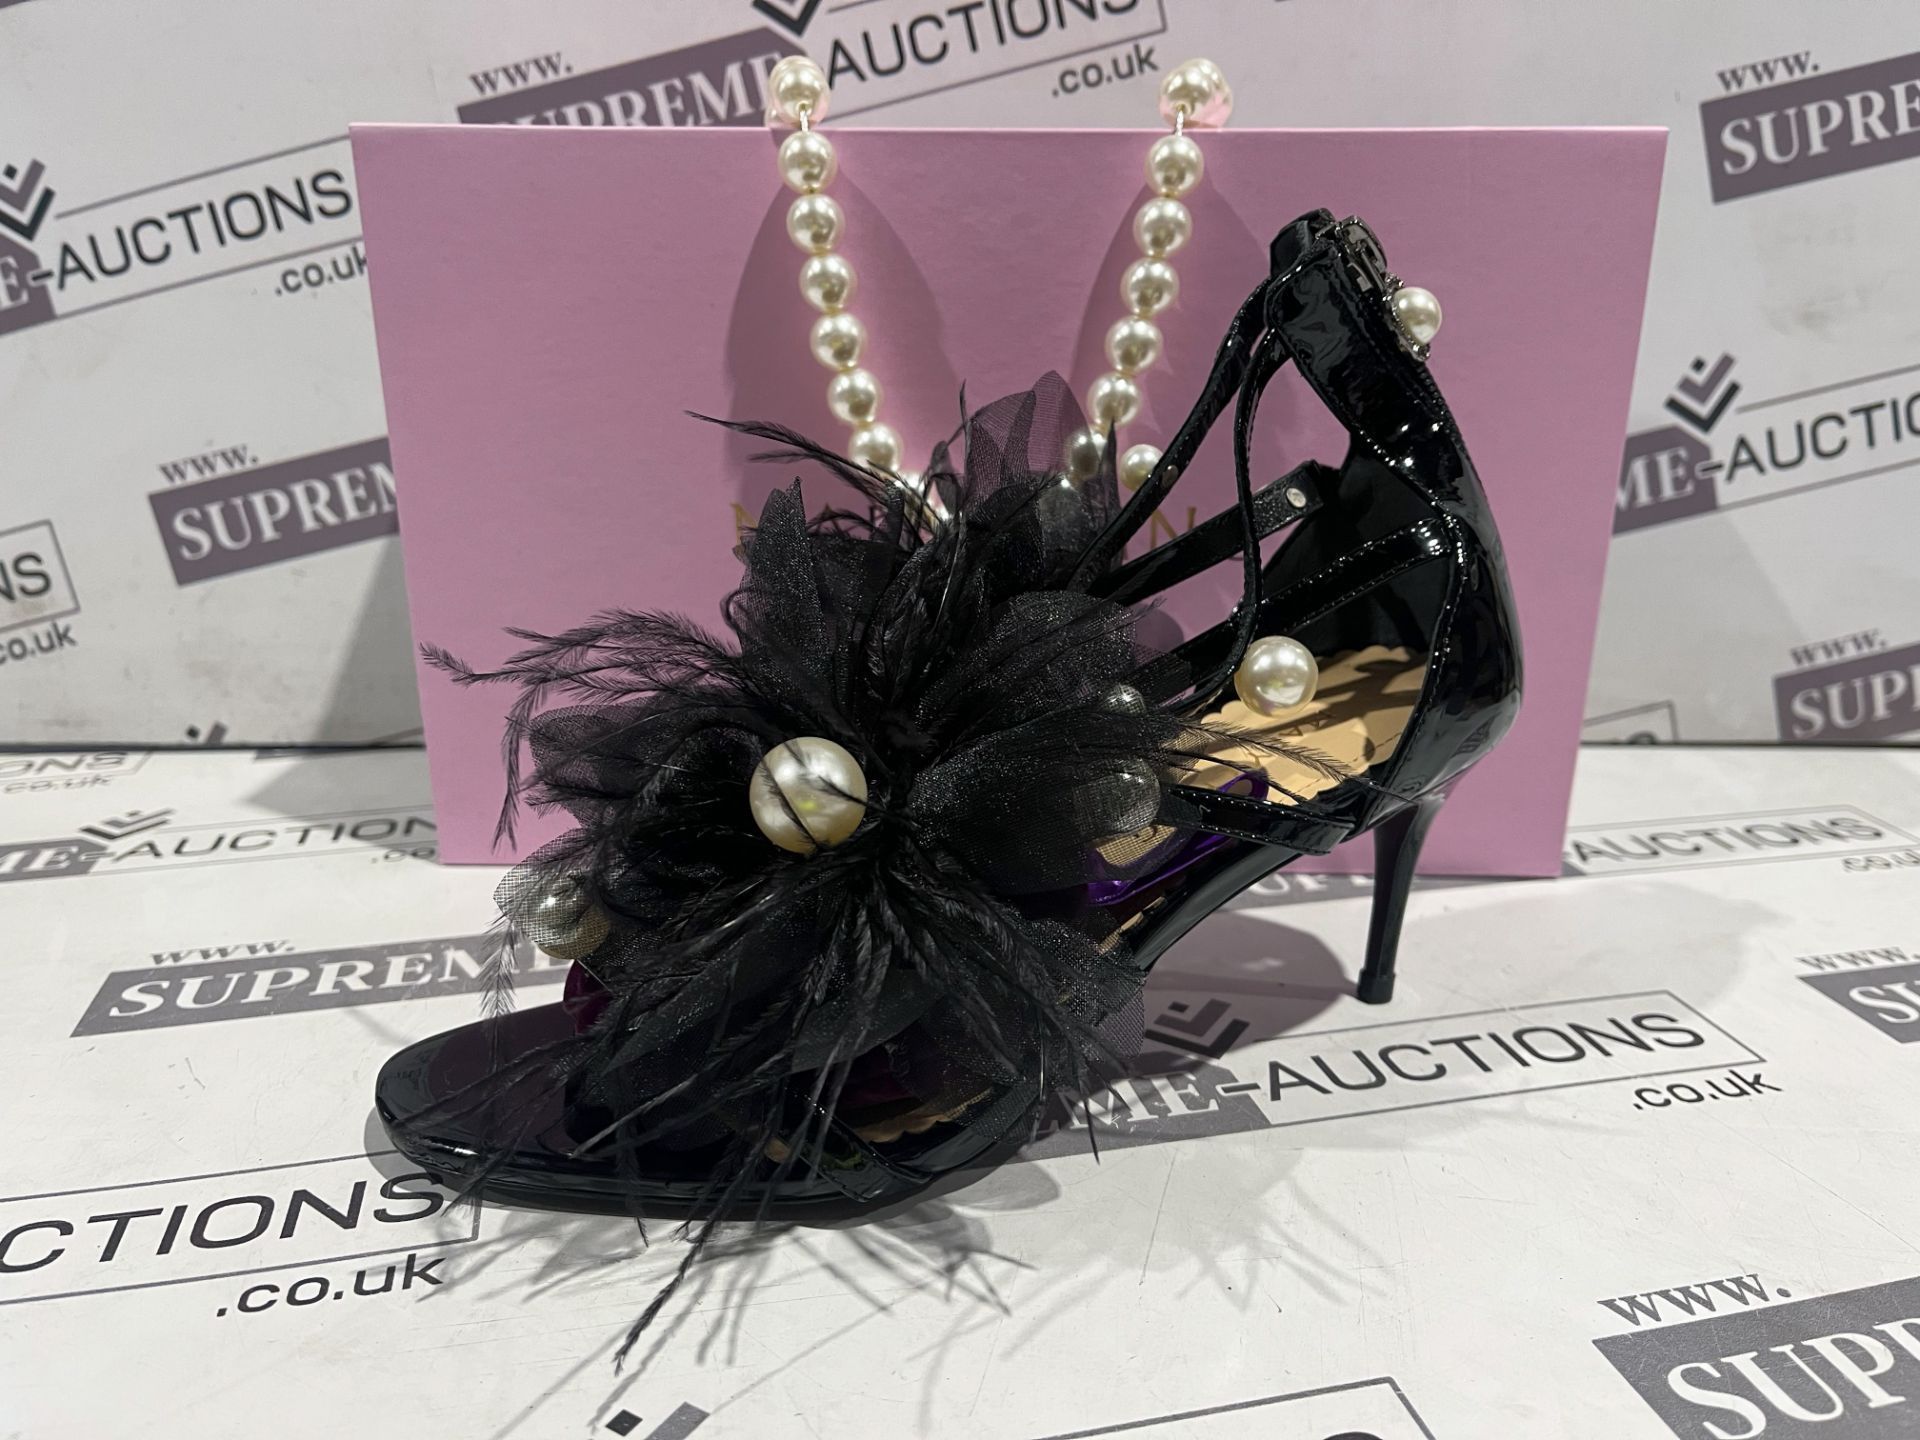 NEW & BOXED MARY CHING Pearl 25 Heel Ladies High End Fashion Shoes. BLACK FEATHER. SIZE 40. RRP £